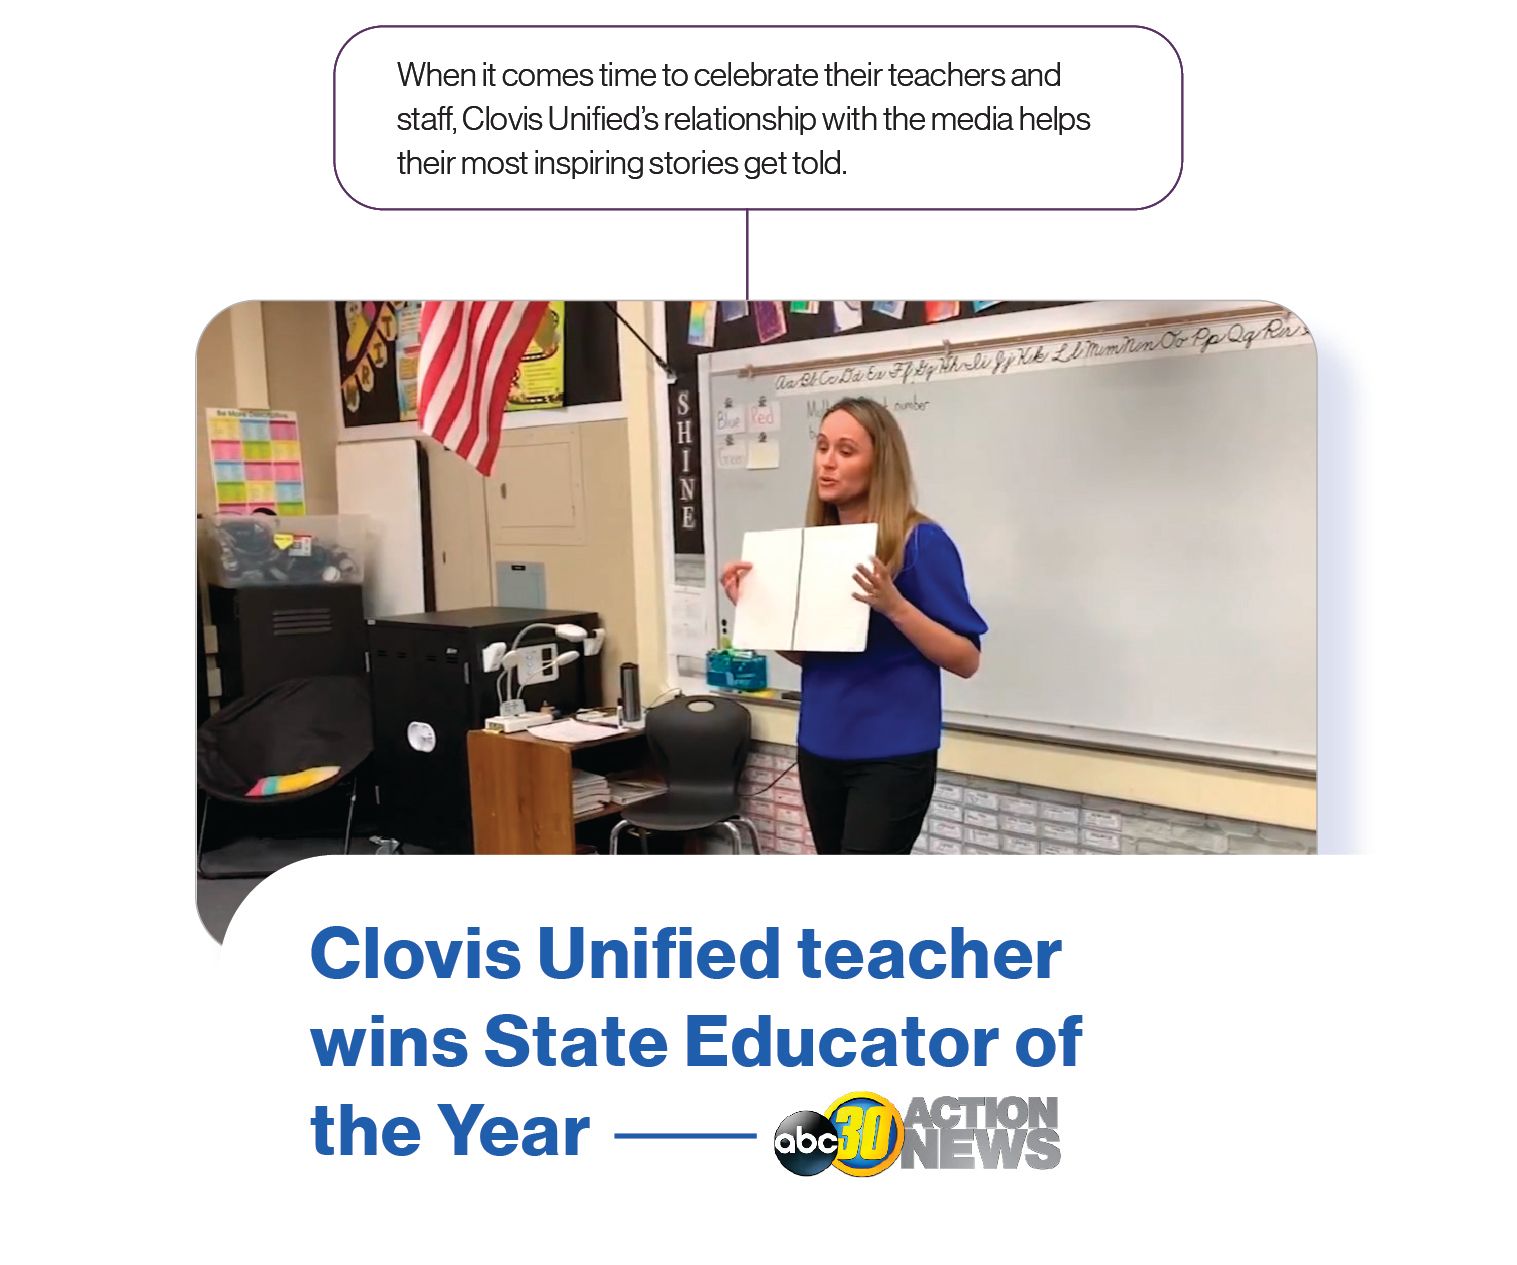 Image: The headline from a local news story with the headline 'Clovis Unified teacher wins State Educator of the Year', with the SchoolCEO commentary, 'When it comes time to celebrate their teachers and staff, Clovis Unified’s relationship with the media help their most inspiring stories get told.'